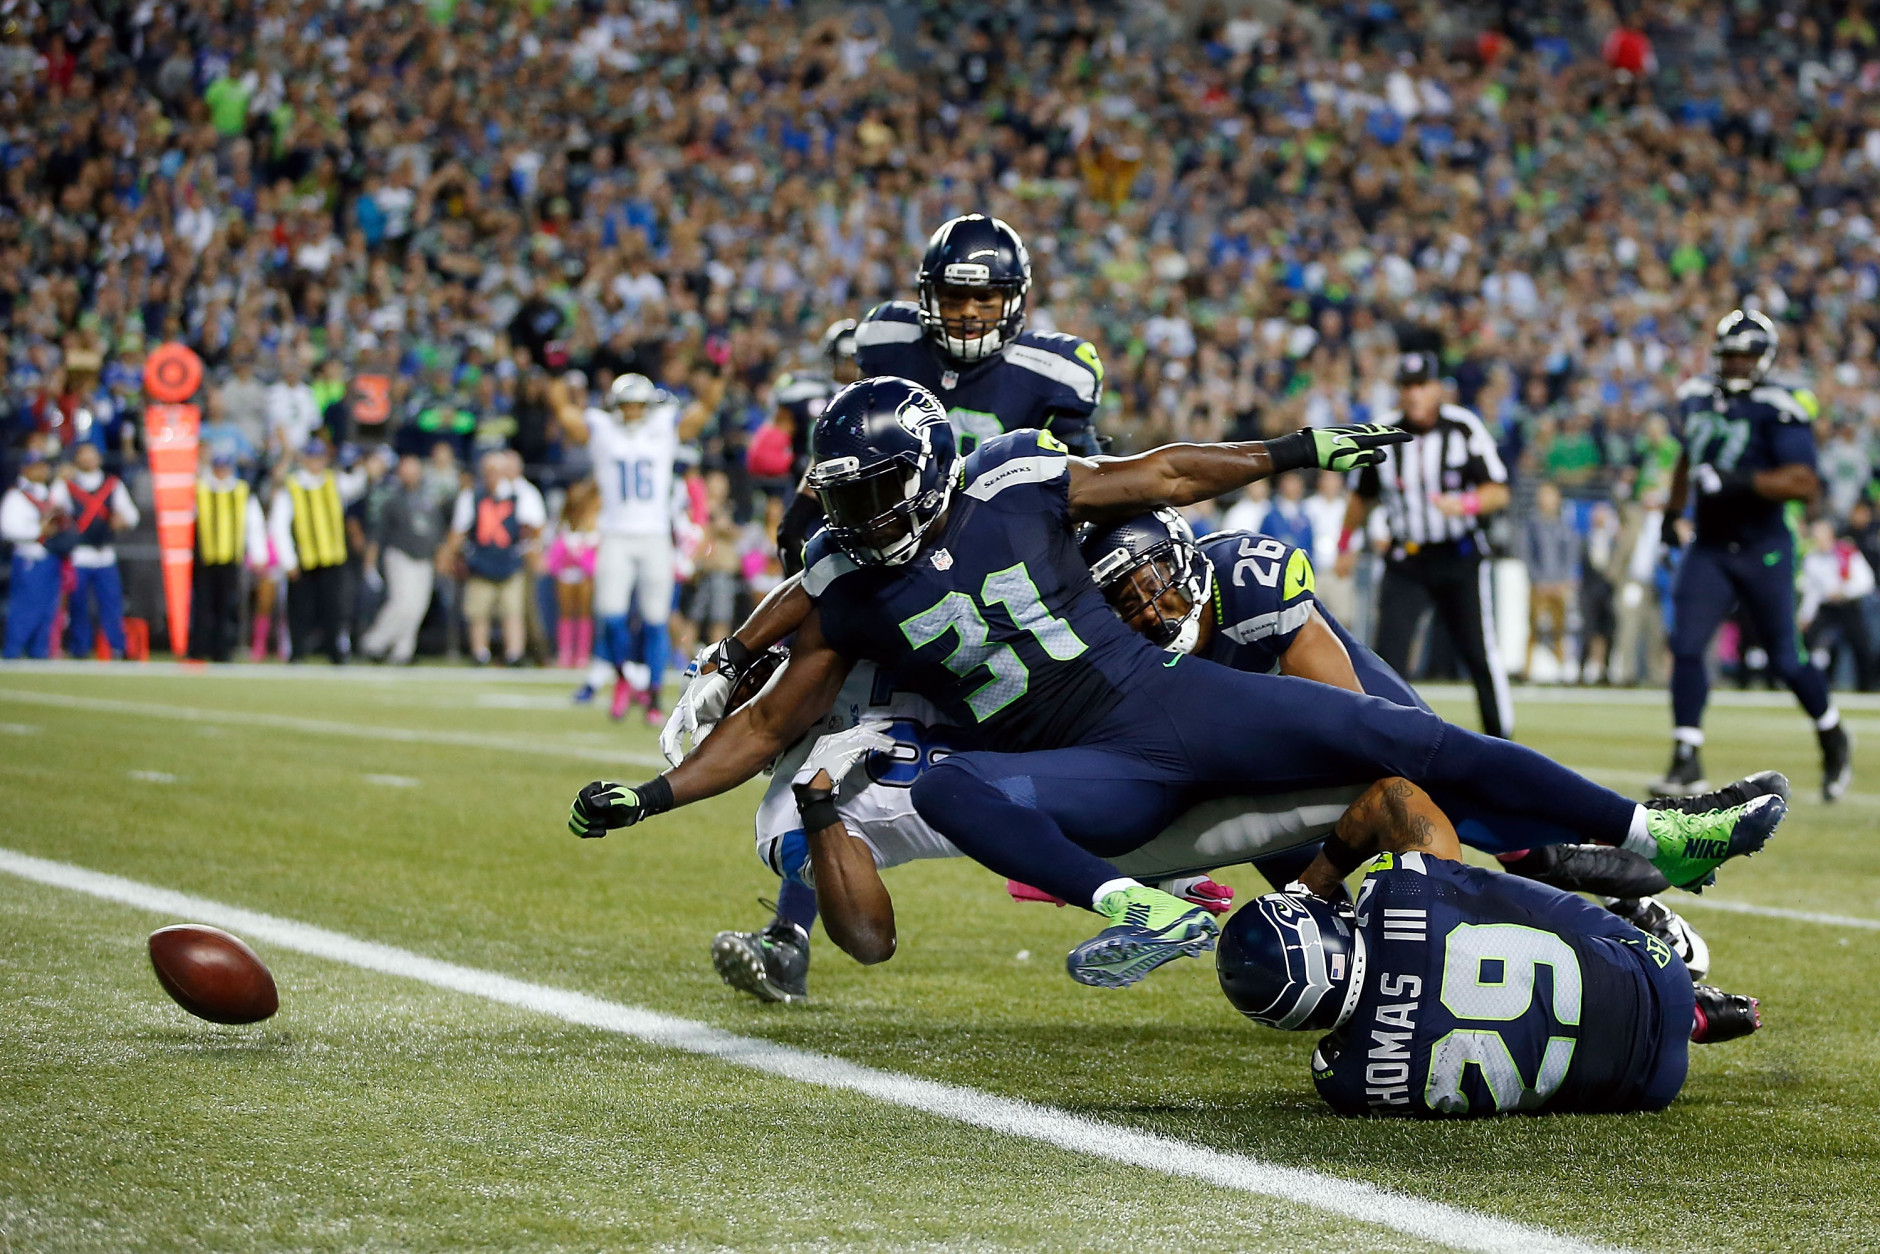 SEATTLE, WA - OCTOBER 05:  Kam Chancellor #31 of the Seattle Seahawks forces Calvin Johnson #81 of the Detroit Lions to fumble the ball near the goal line during the fourth quarter of their game at CenturyLink Field on October 5, 2015 in Seattle, Washington.  (Photo by Otto Greule Jr/Getty Images)